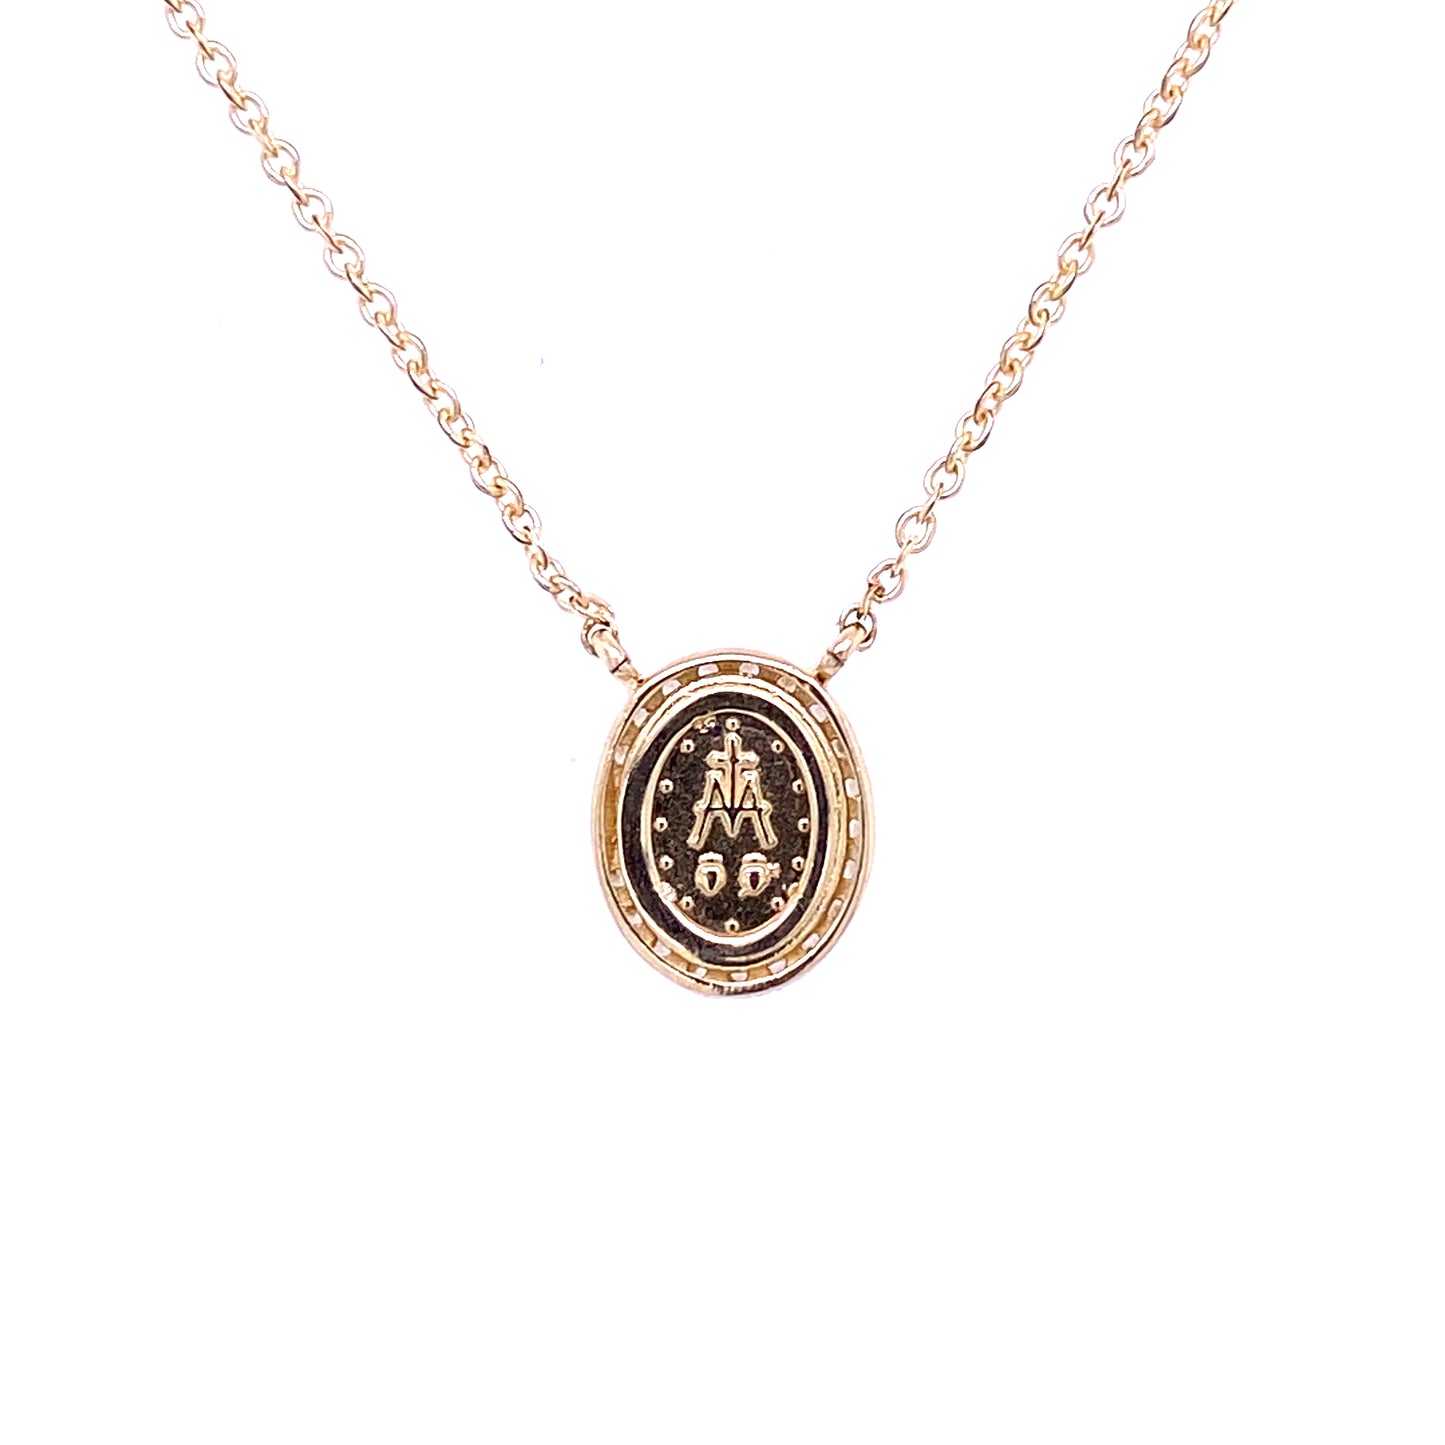 Miniature Guadalupe/Miraculous Medal with Cubic Zirconia Frame on Cable Chain Necklace 14K Gold